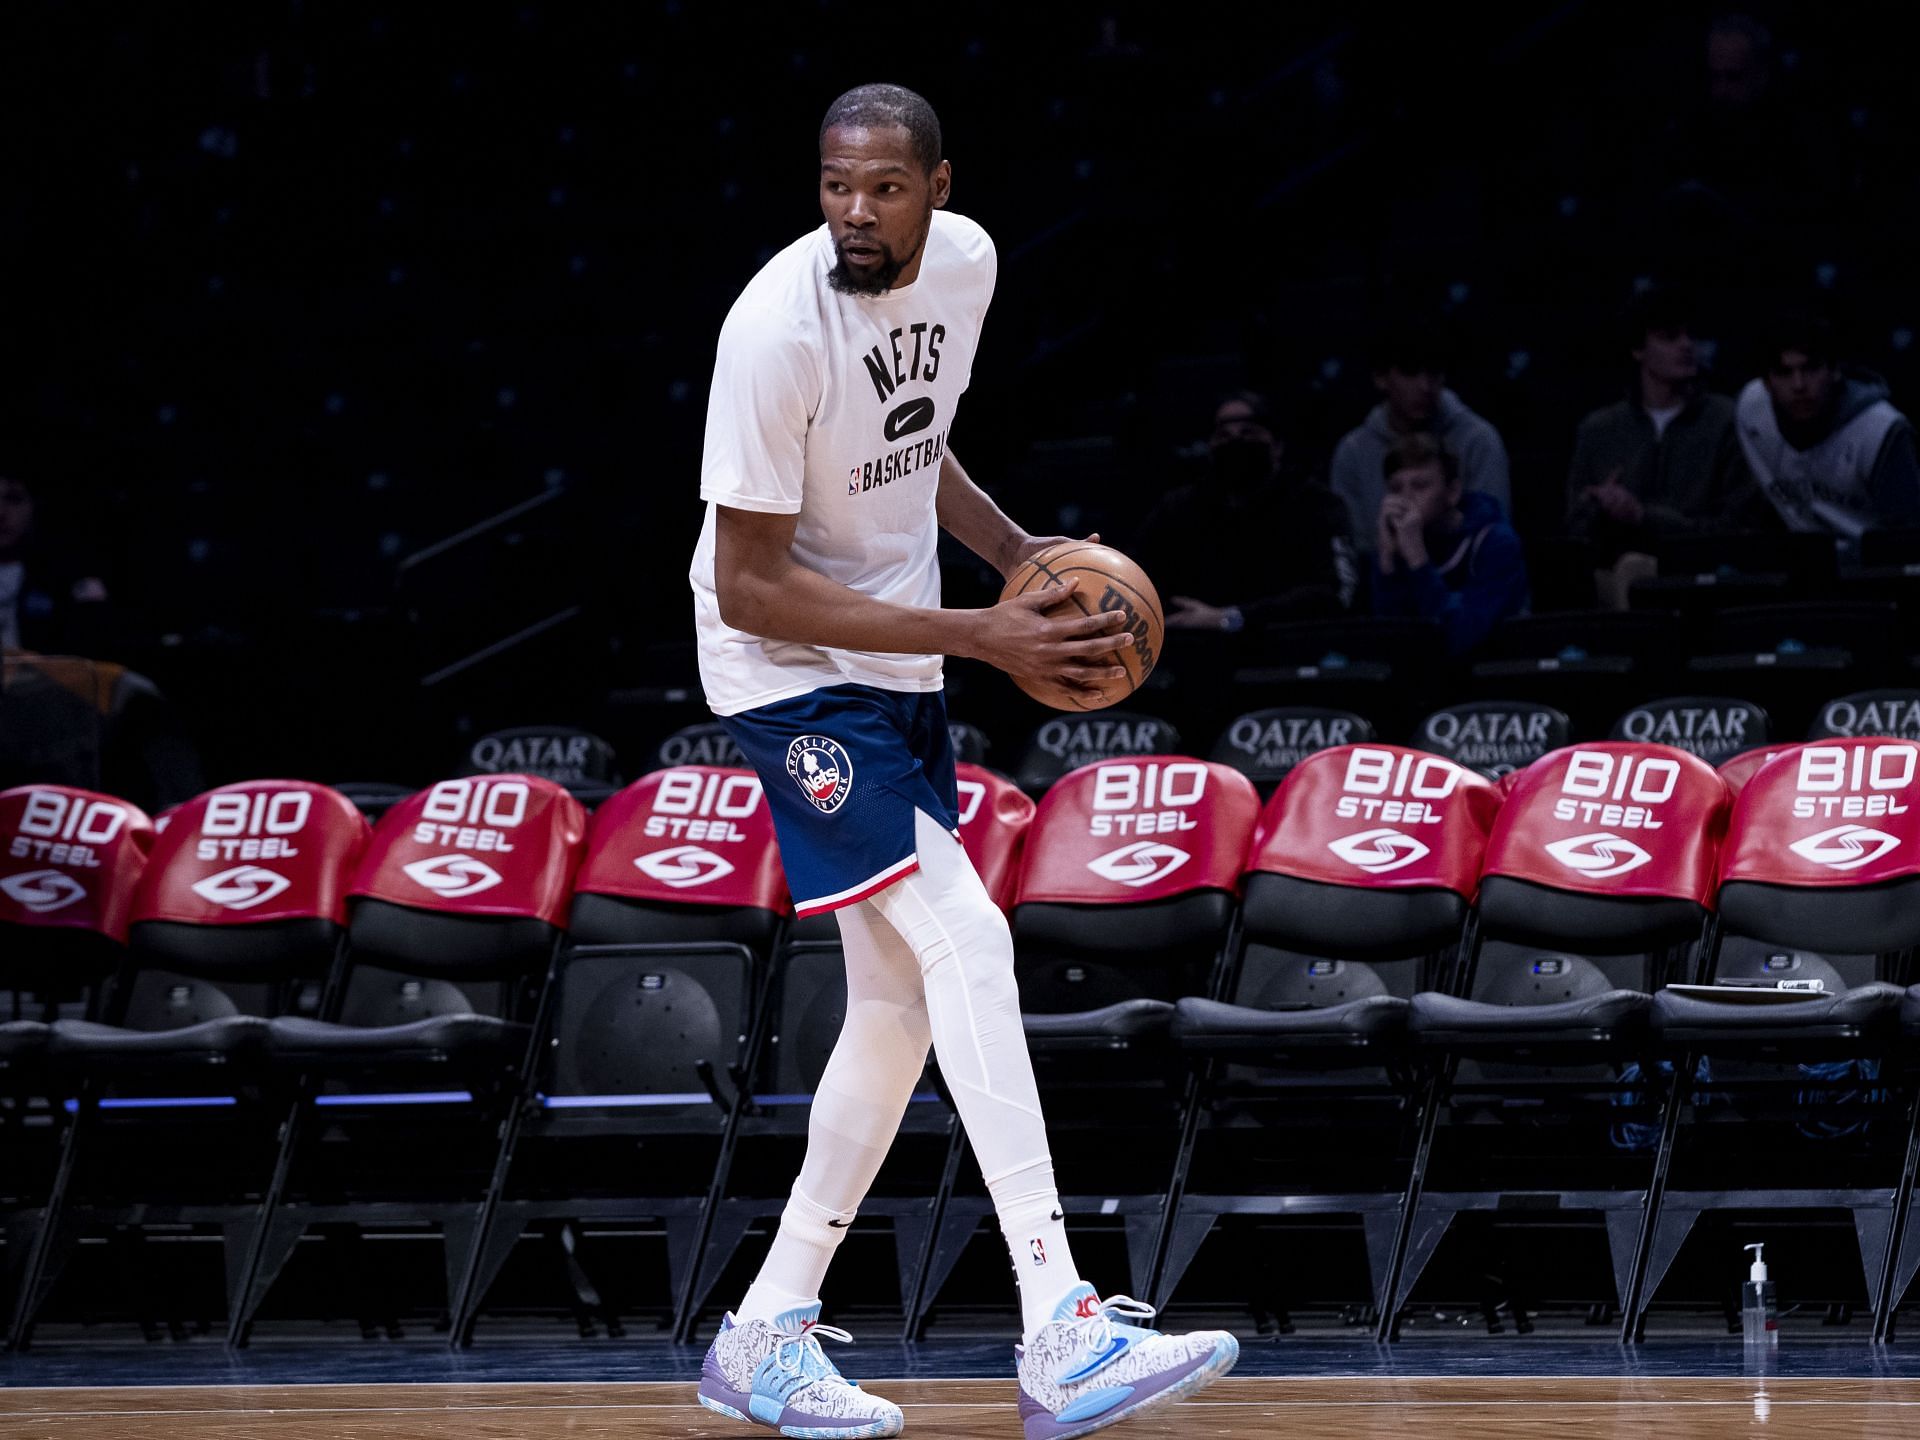 Kevin Durant of the Brooklyn Nets warms up pre-game before facing the Miami Heat